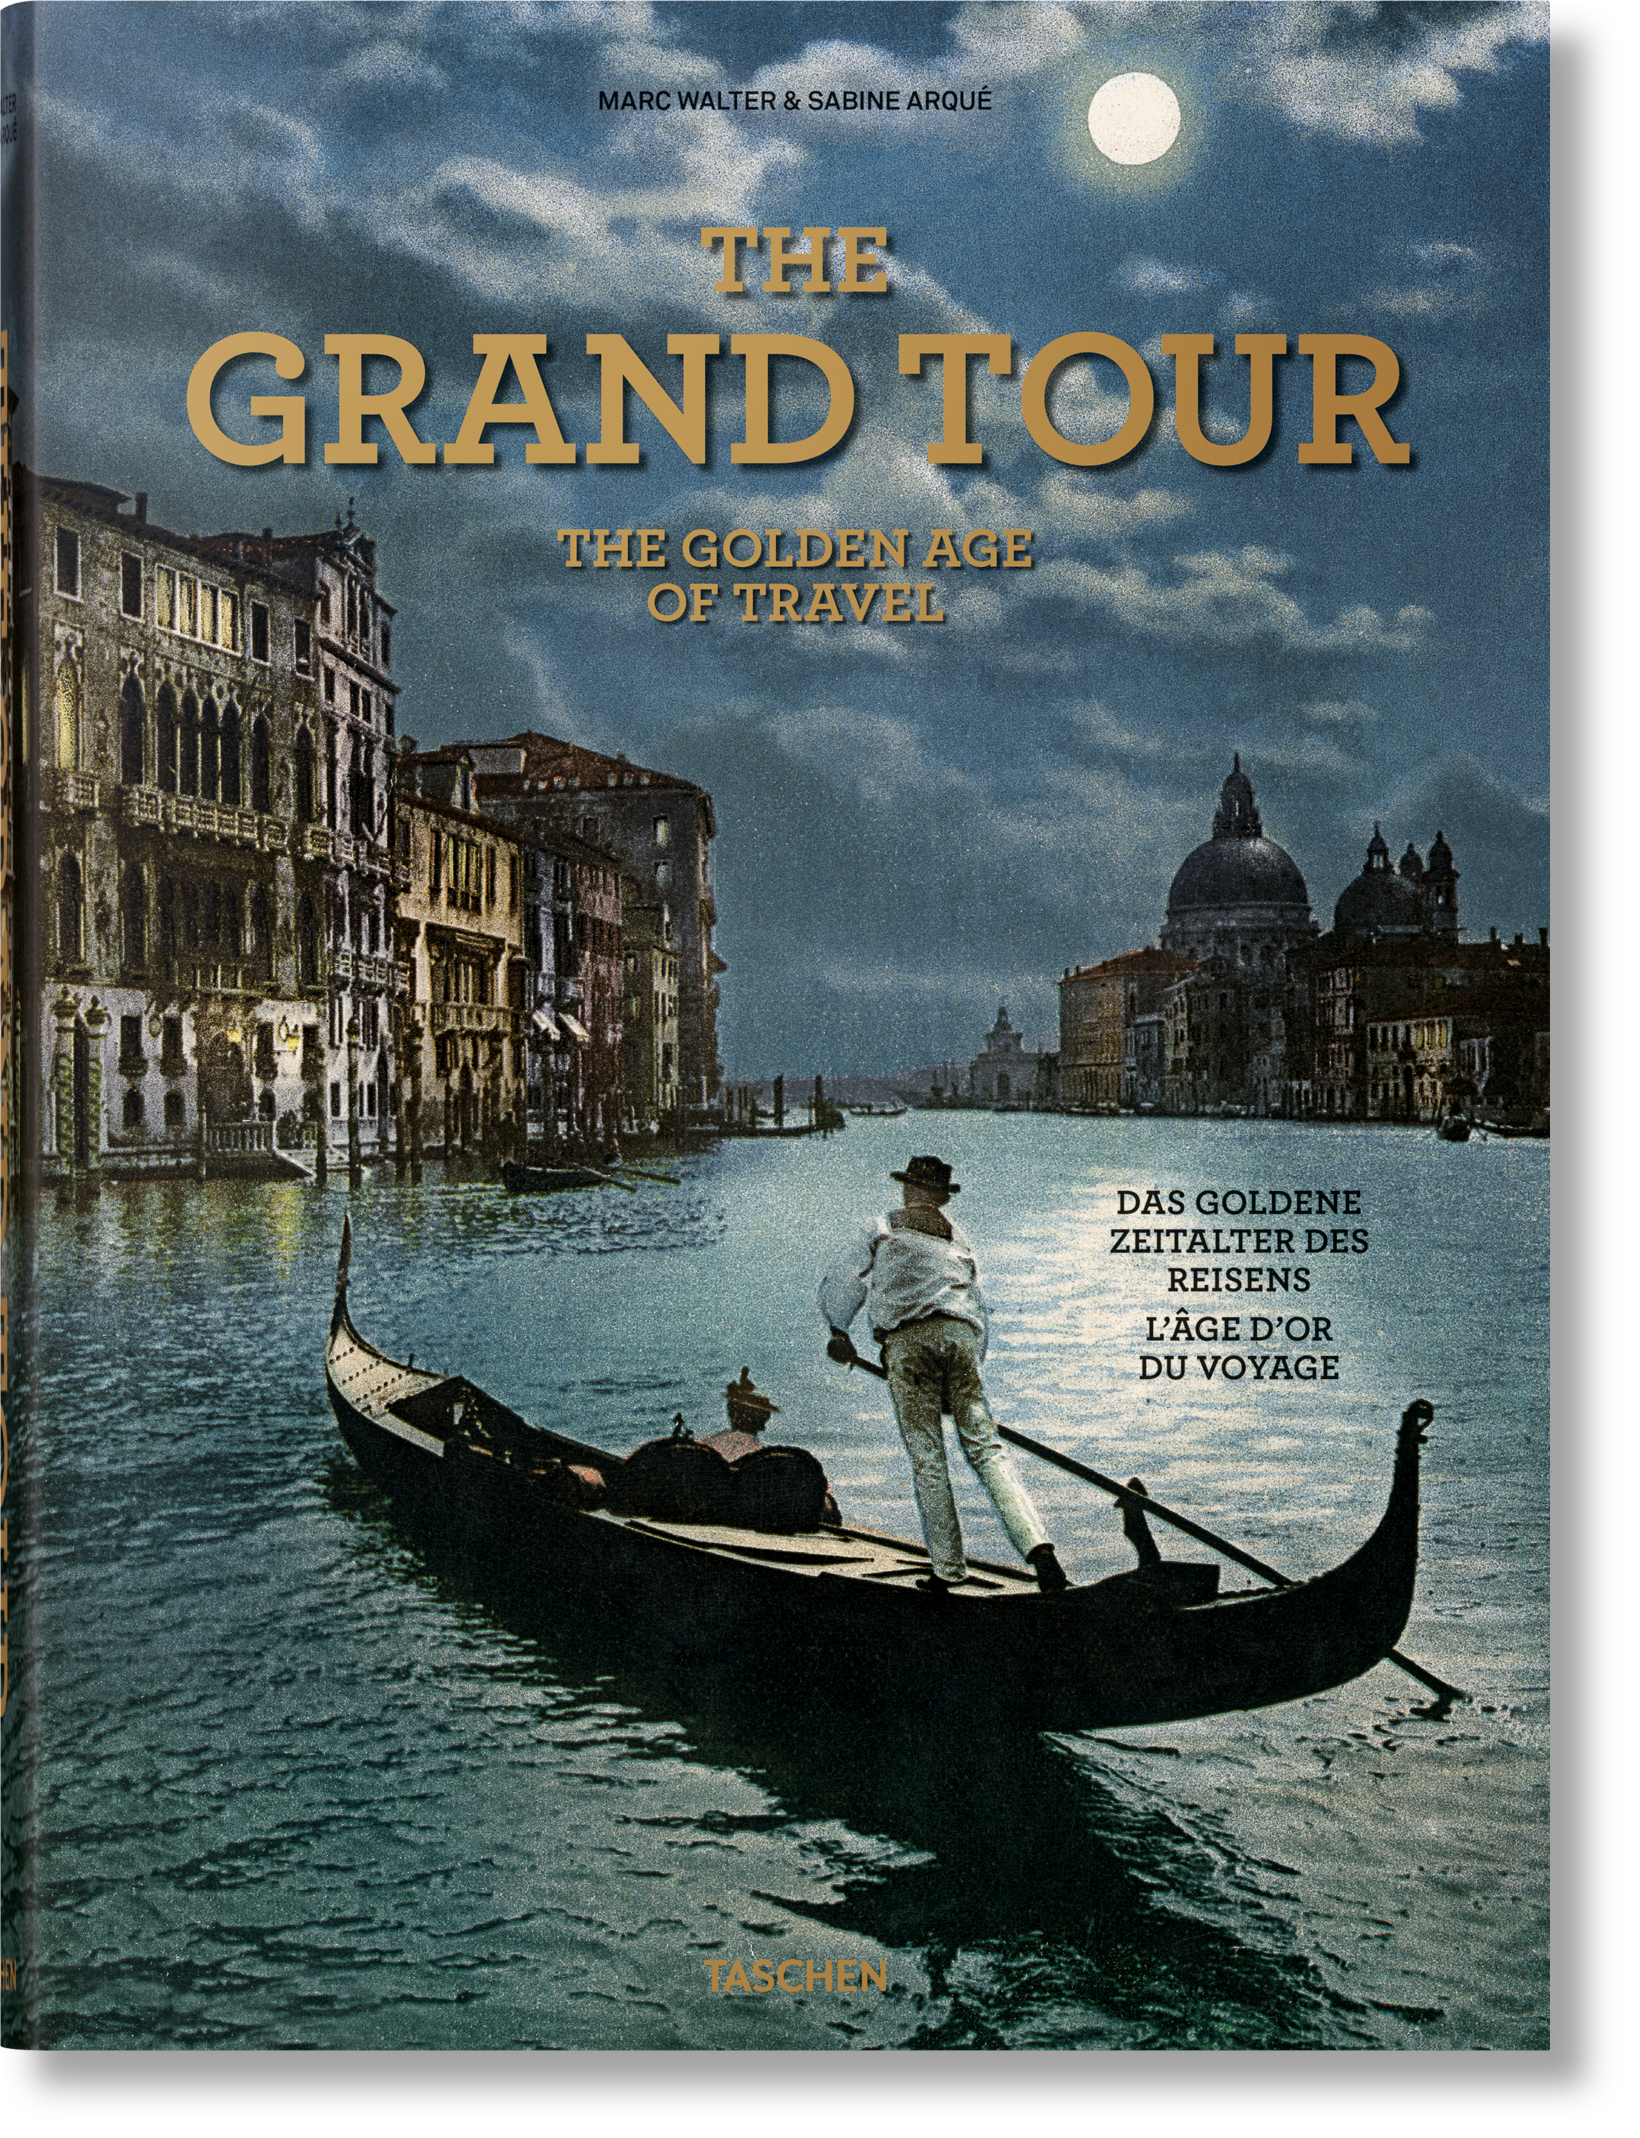 TASCHEN Books: The Grand Tour. The Golden Age of Travel